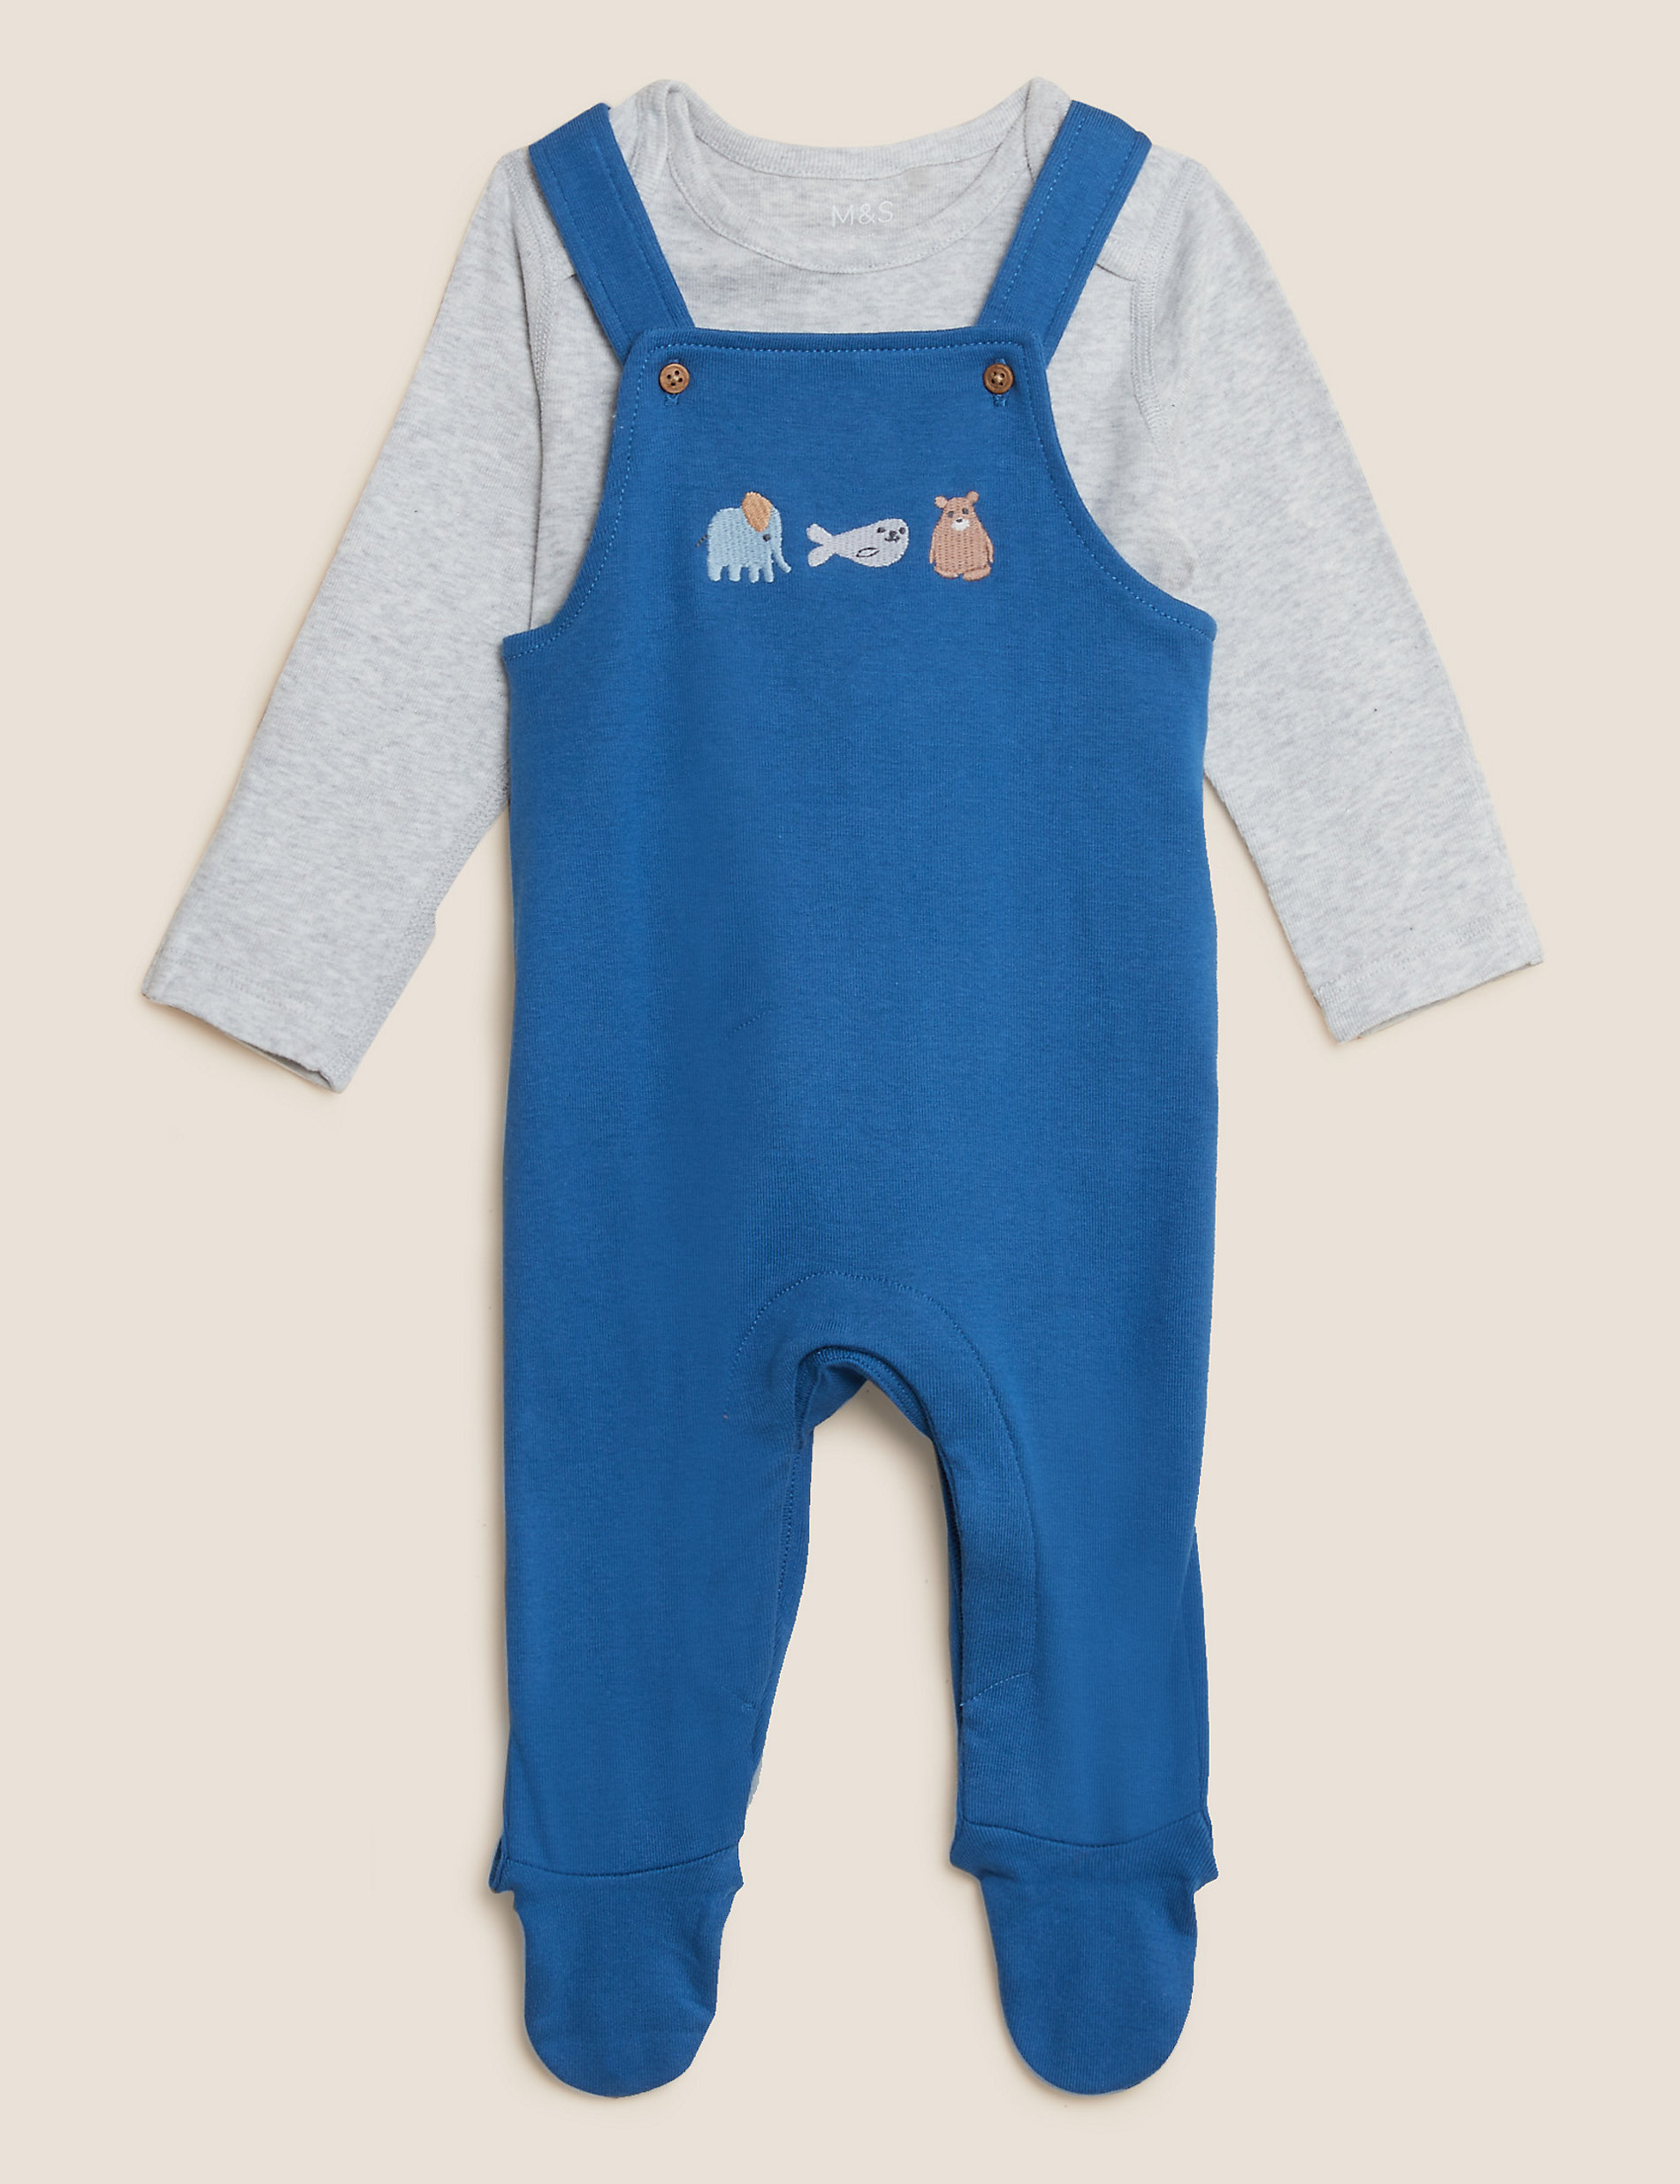 2pc Pure Cotton Animal Dungaree Outfit (7lbs - 12 Mths)